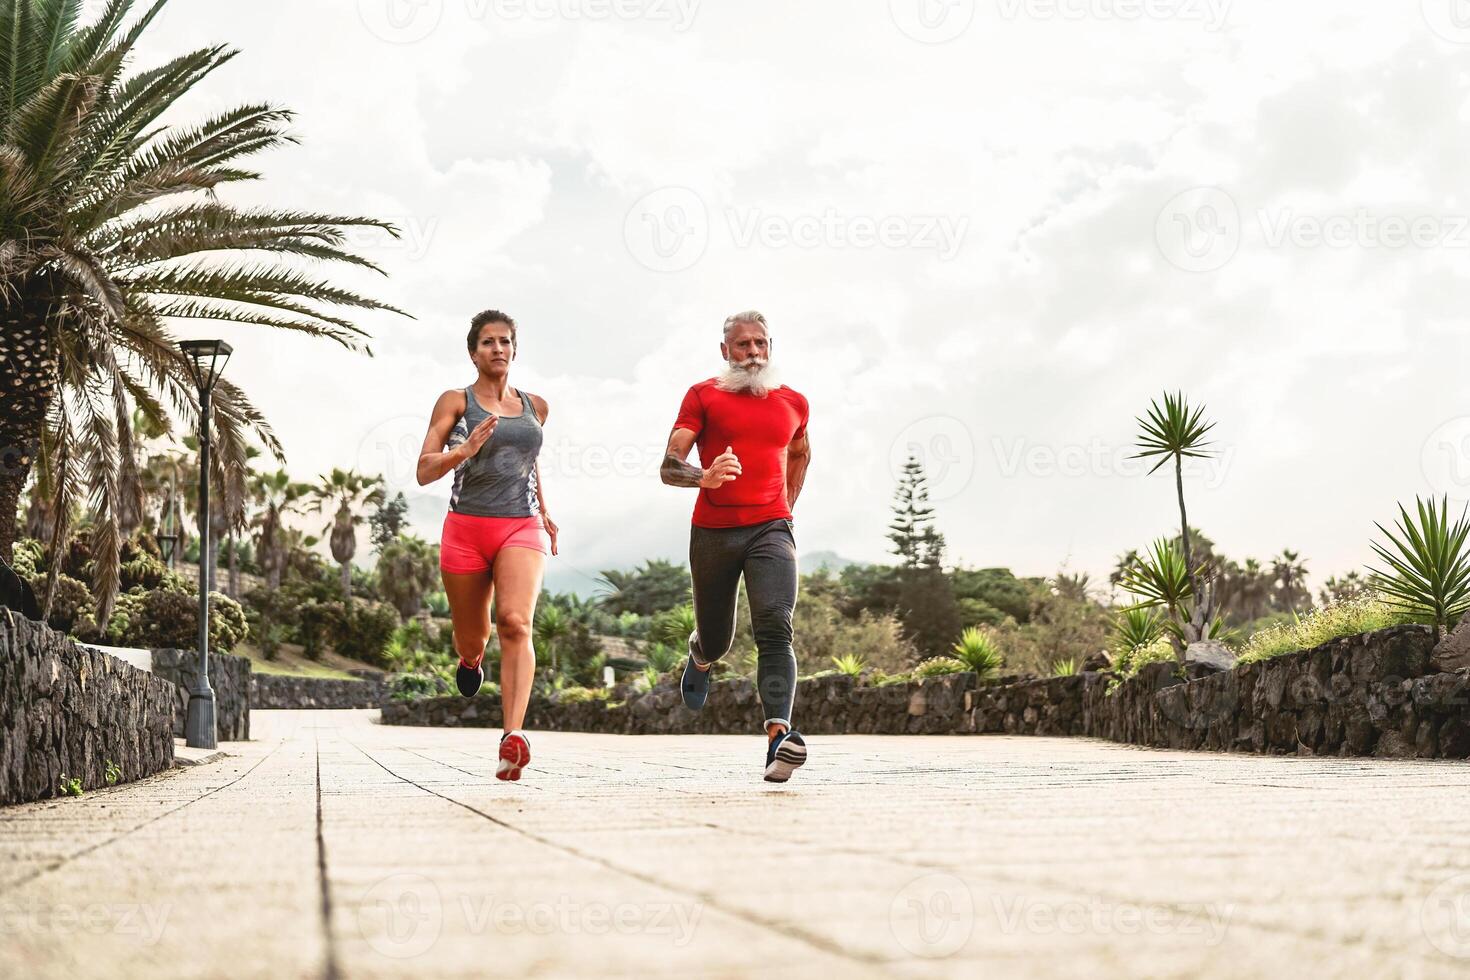 Fit friends running together in park outdoor - Sporty people doing workout sprint exercises outside - Fitness, jogging and health training lifestyle concept photo